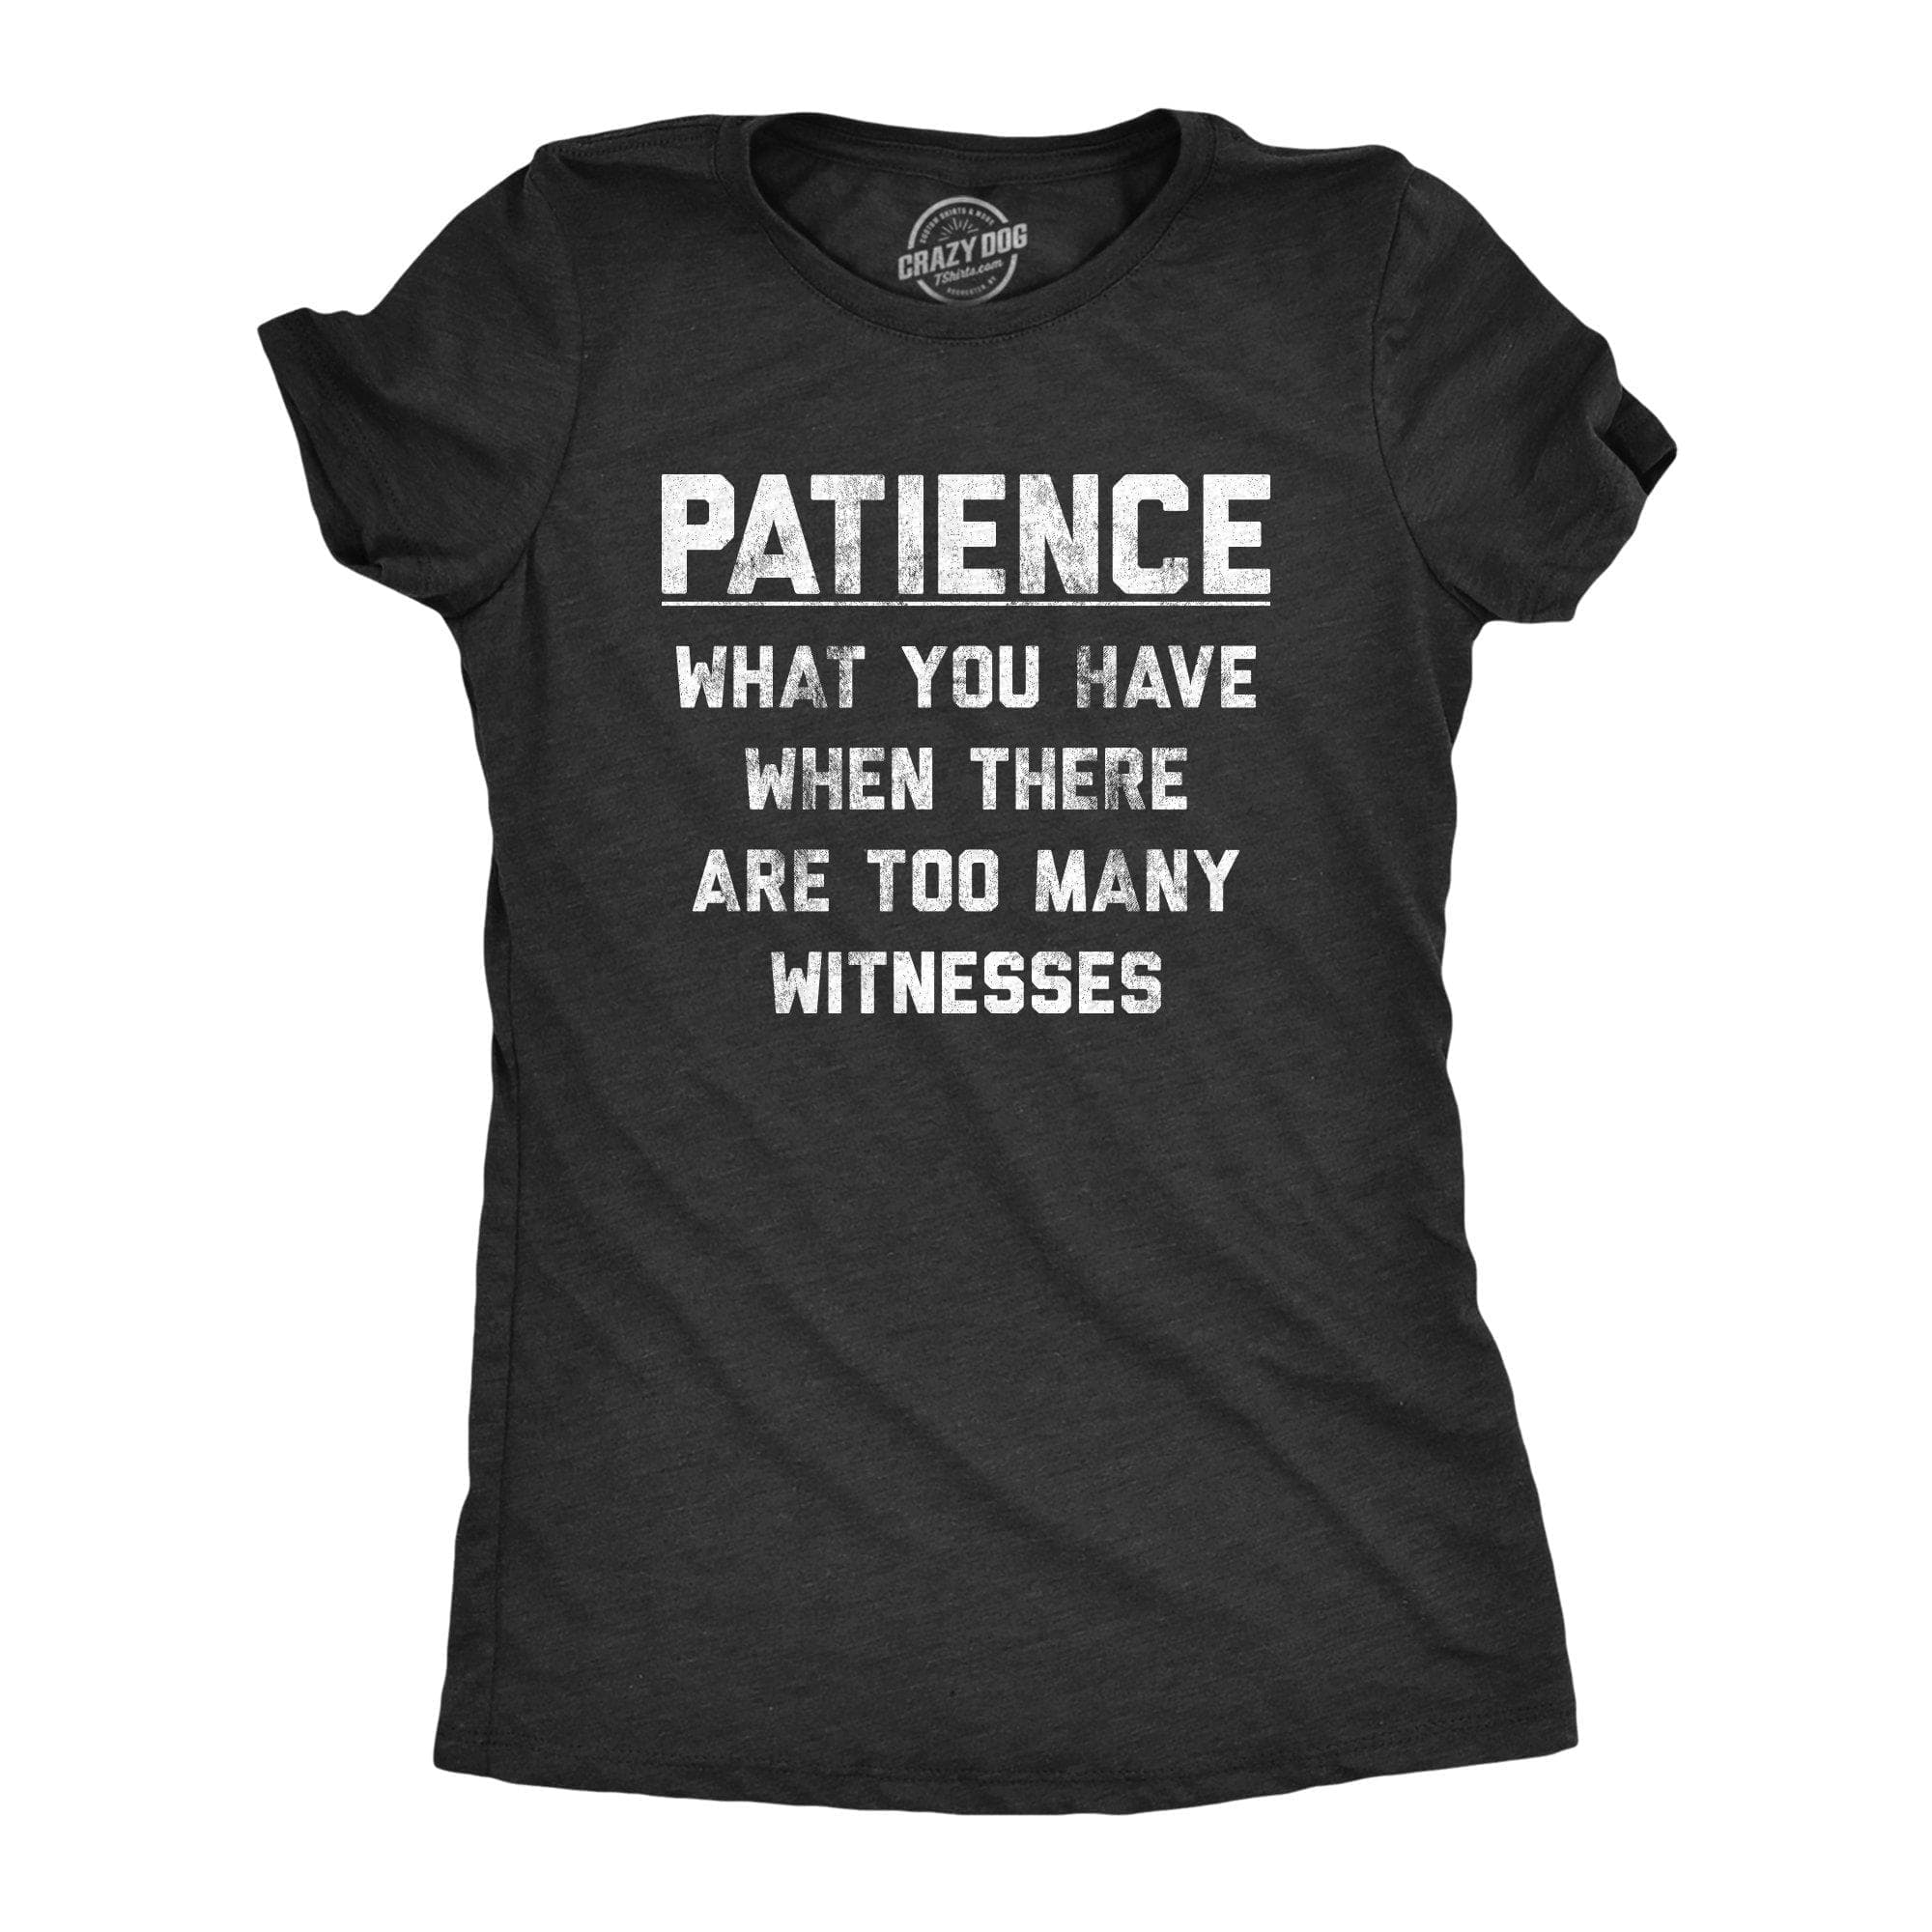 Patience What You Have When There Are Too Many Witnesses Women's Tshirt - Crazy Dog T-Shirts